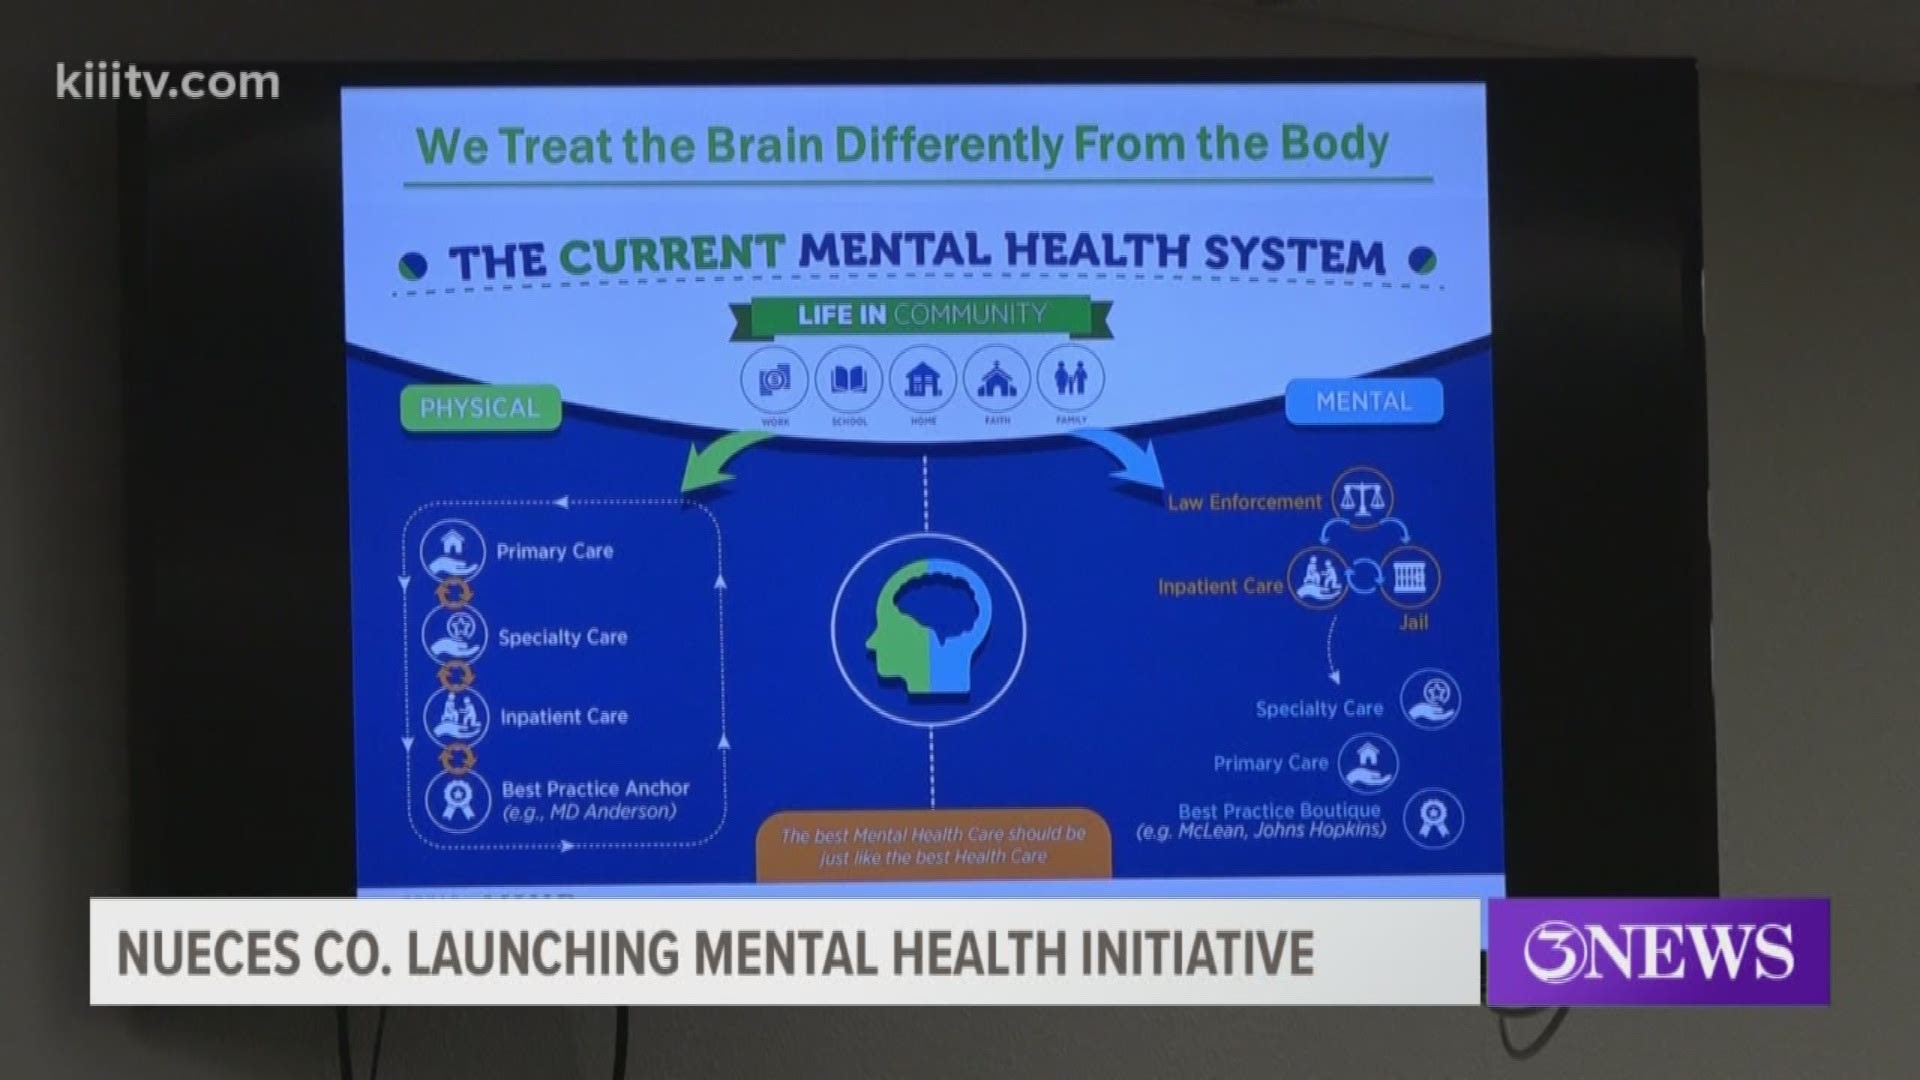 Nueces County is launching an initiative to deal with mental health issues head-on.